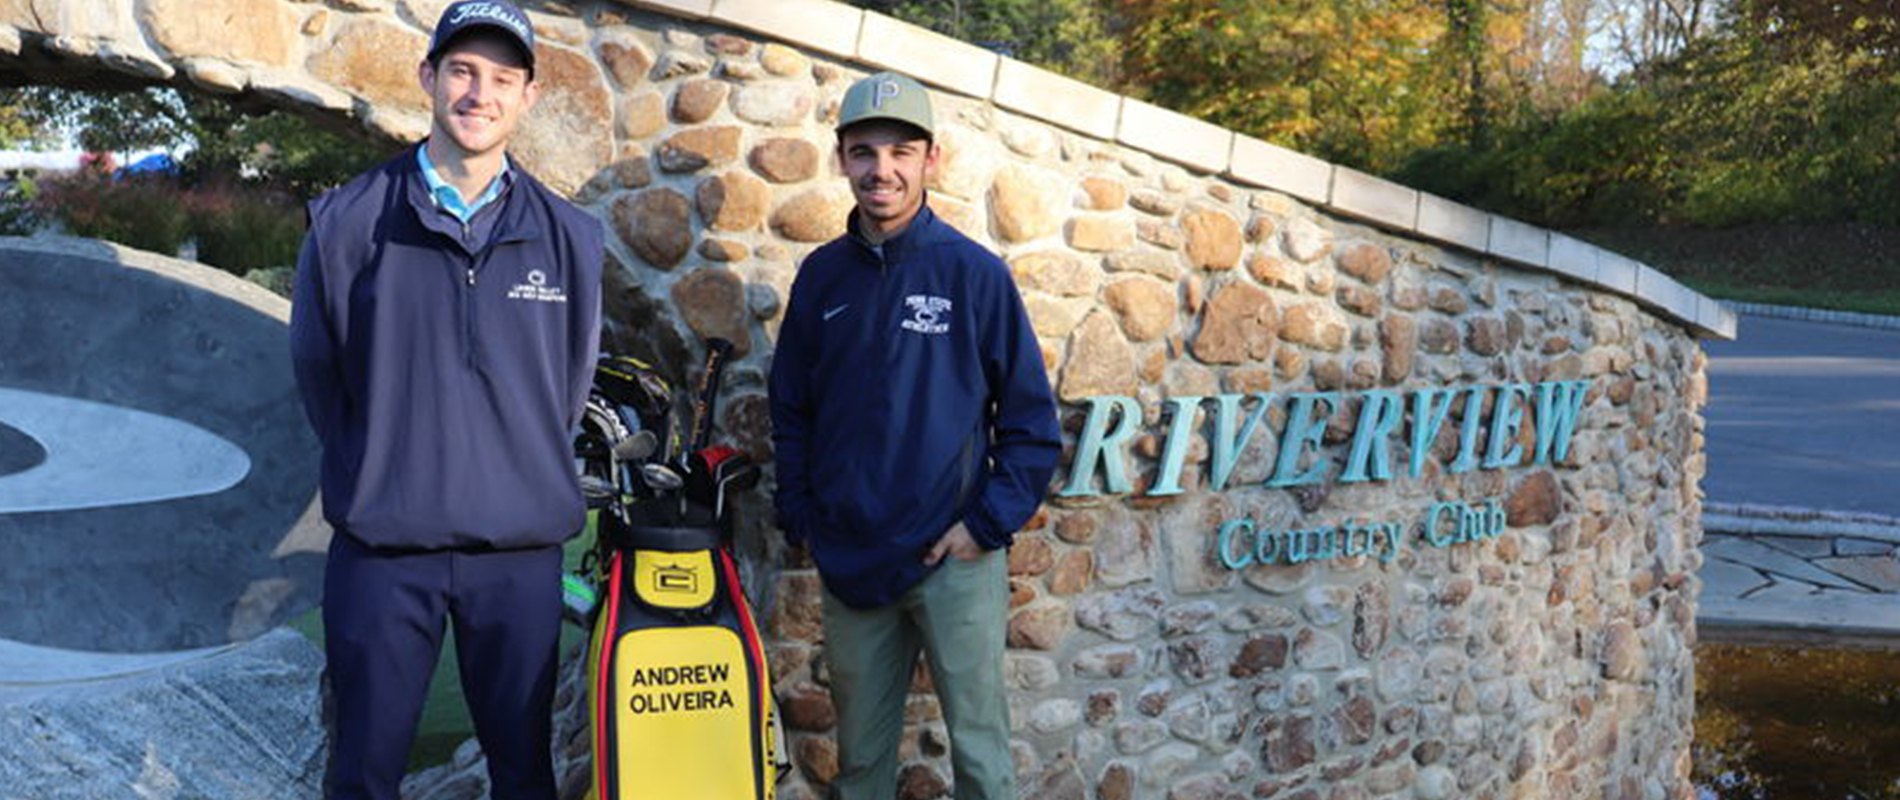 Students Kevin Wagner and Andrew Oliveira are the new assistant manager and manager at Riverview Country Club in Easton, the new home of PSU-LV golf team.